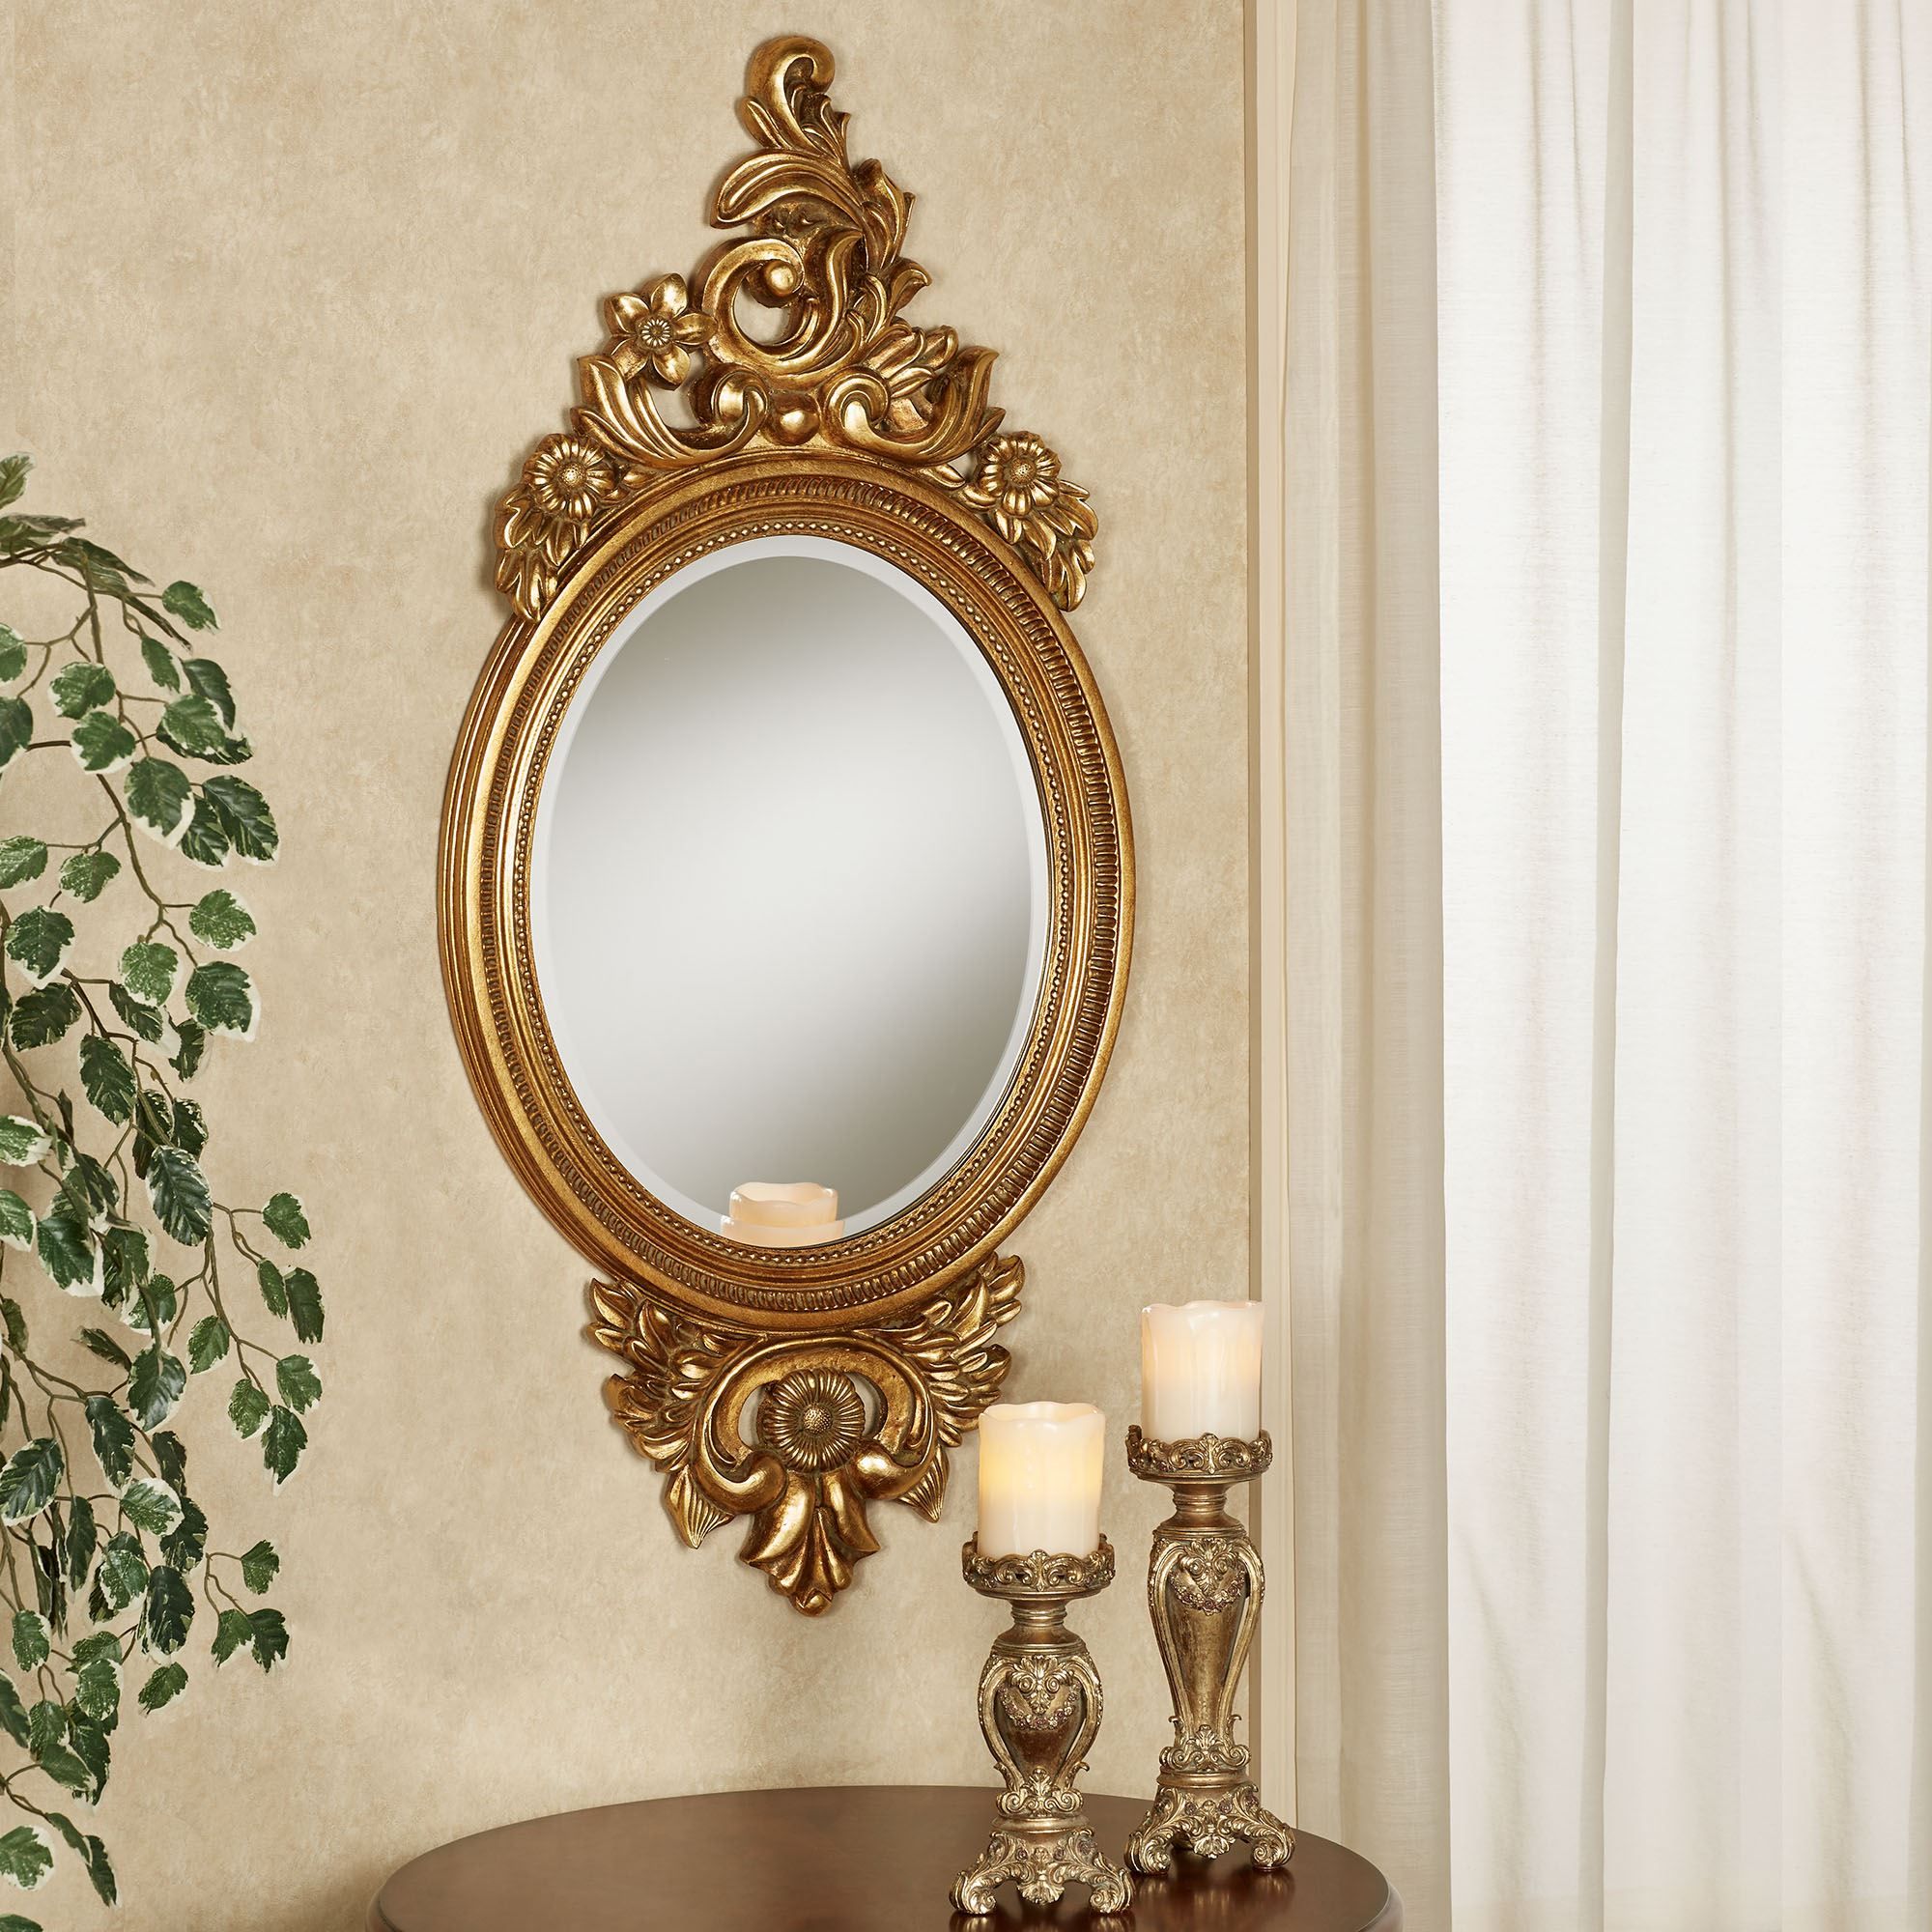 Cesena Decorative Oval Wall Mirror With Regard To Booth Reclaimed Wall Mirrors Accent (View 2 of 15)